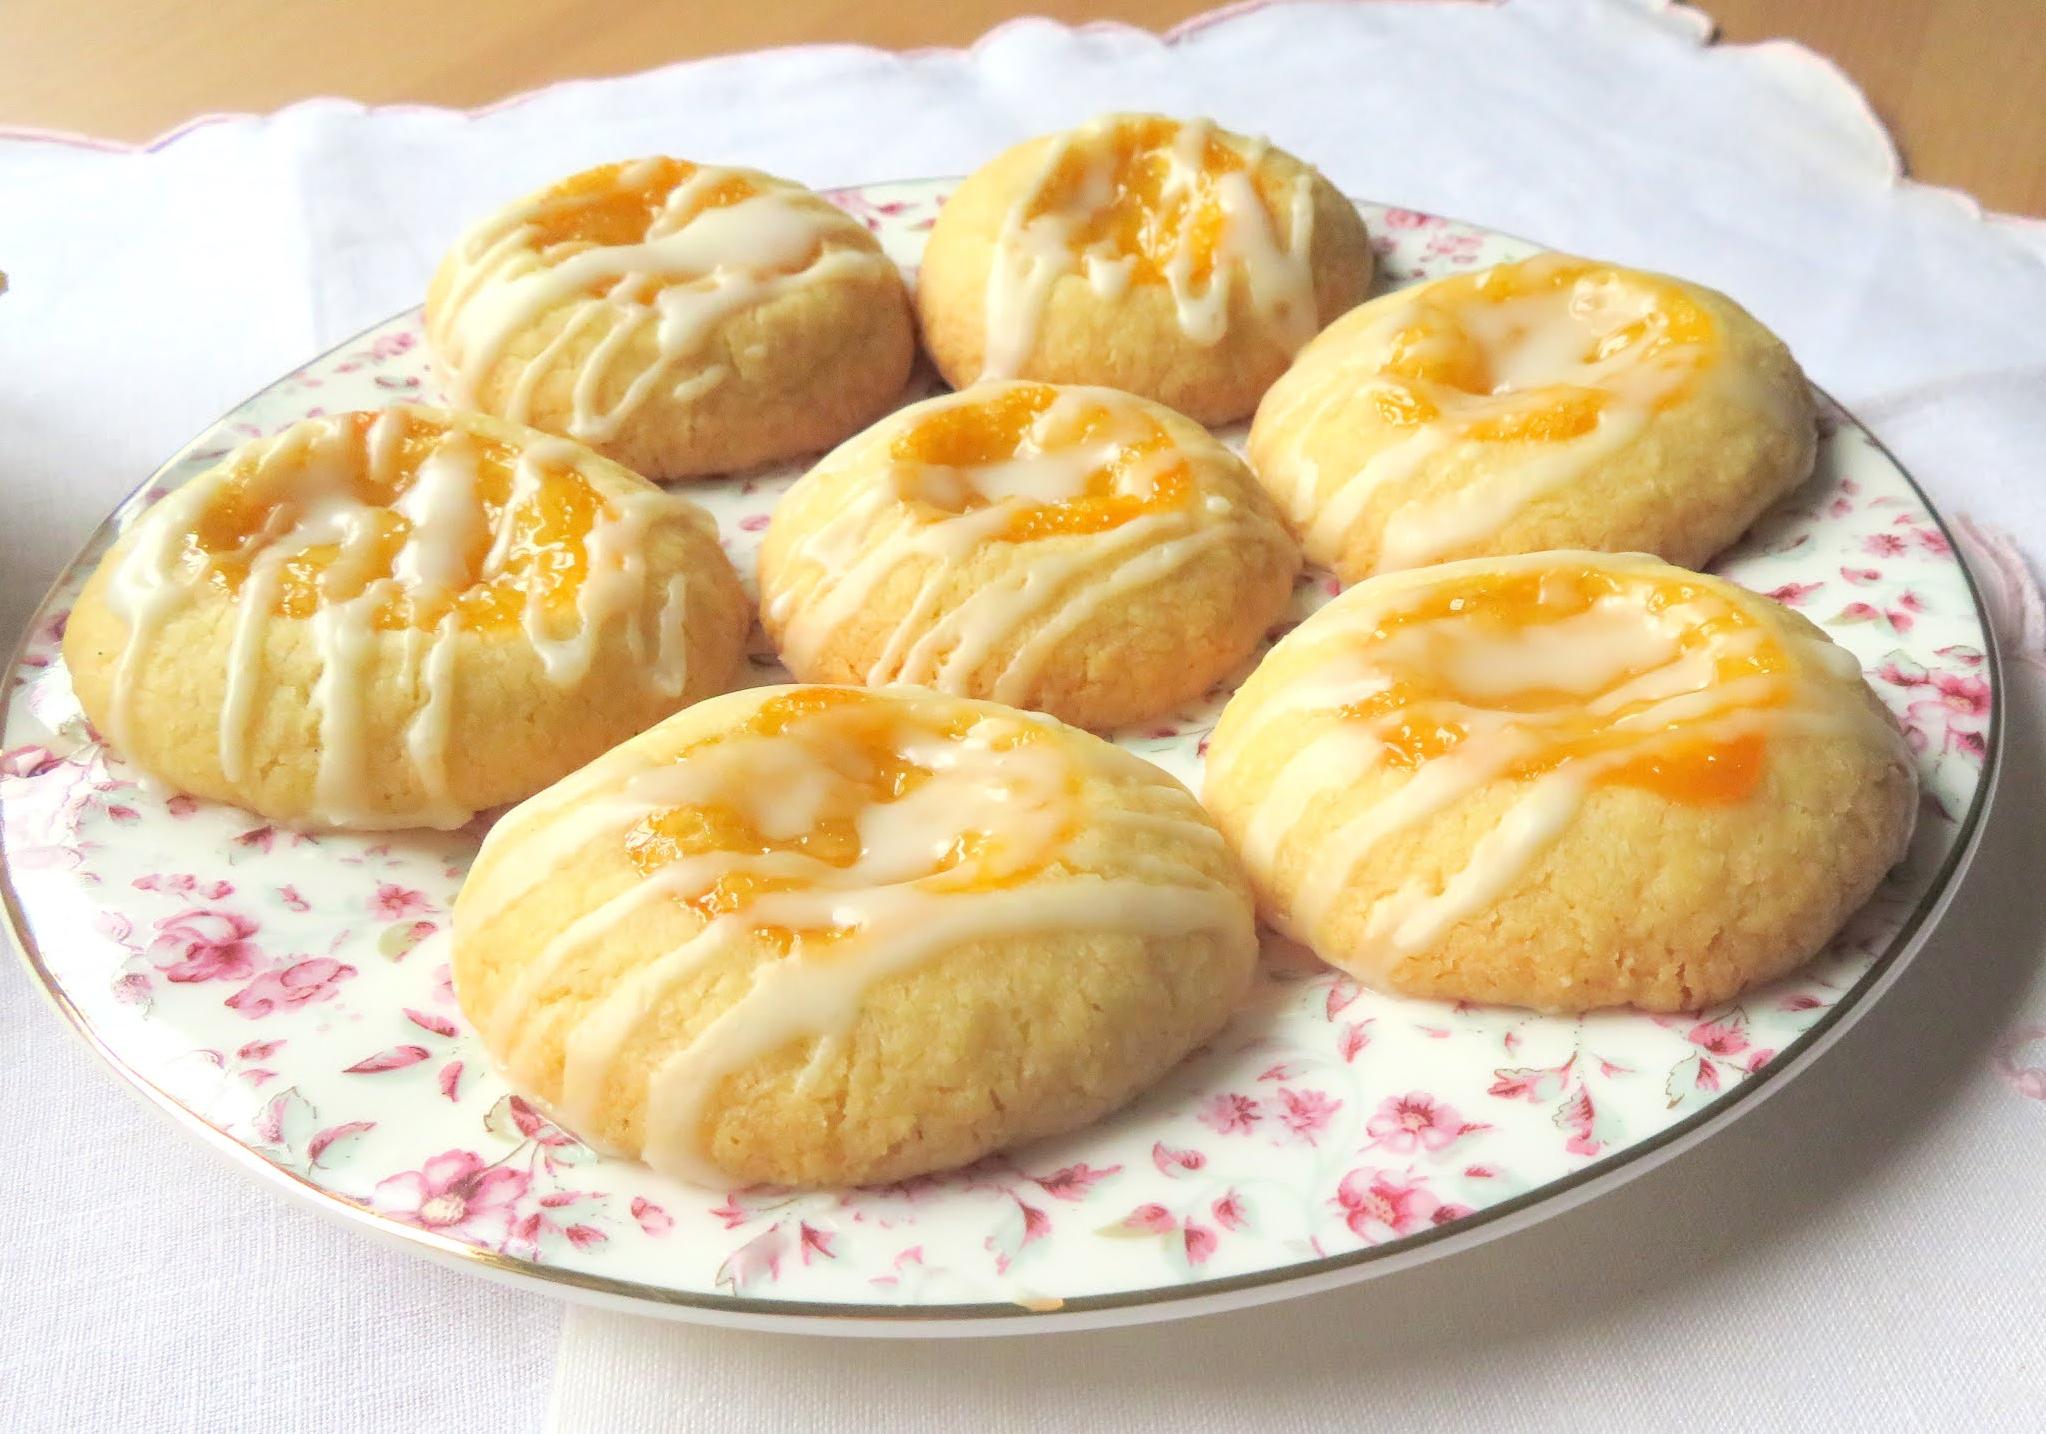  Perfectly baked round cookies filled with mouth-watering lemon curd - a true delight!